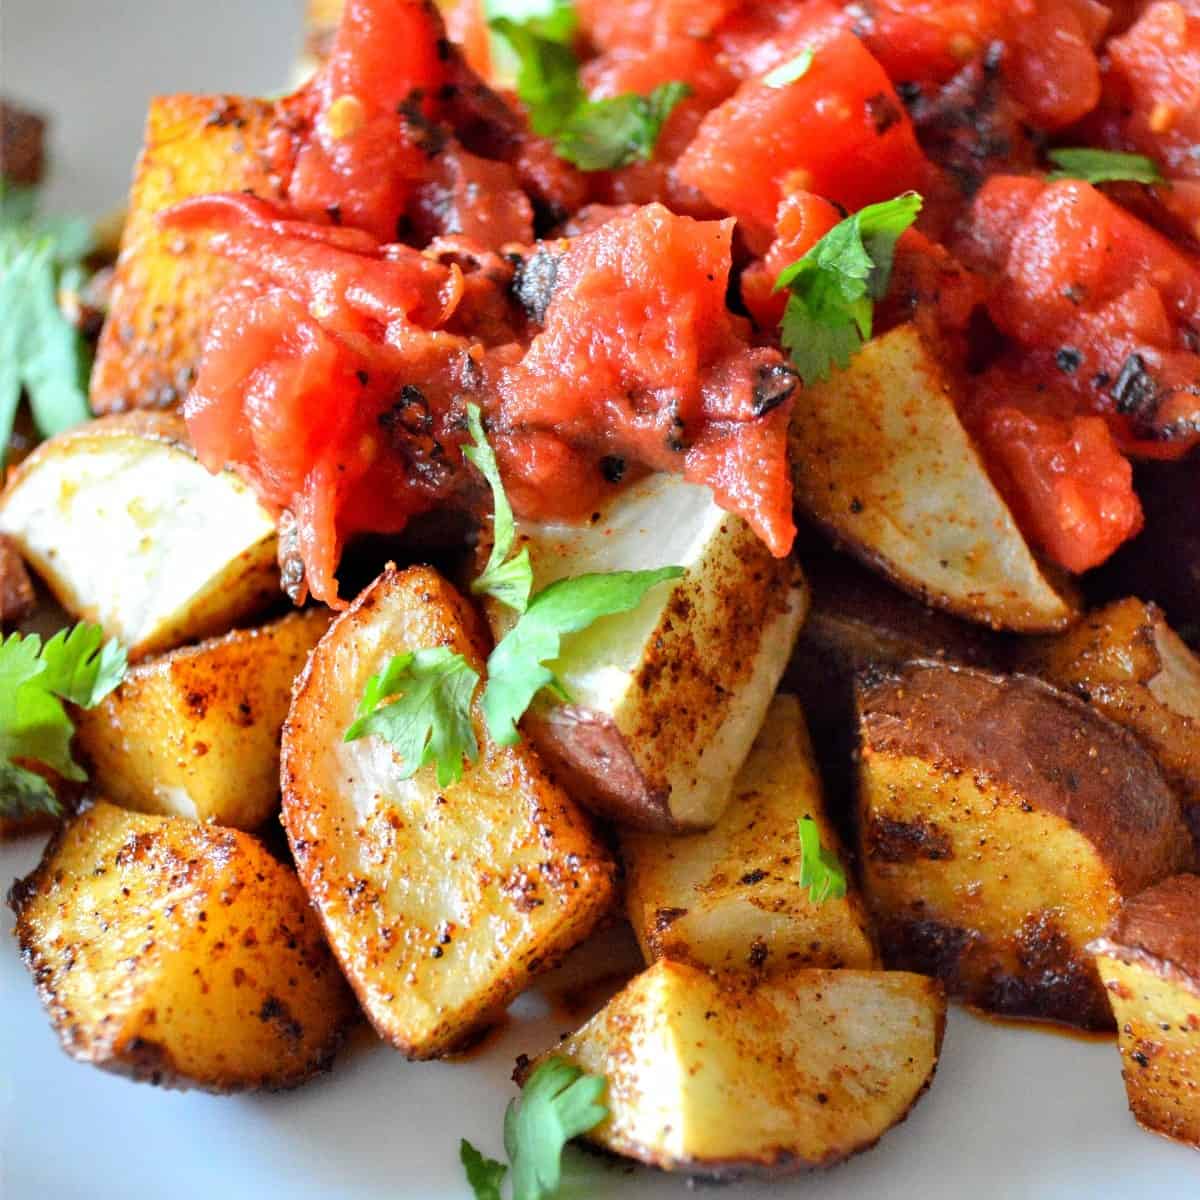 Close up view of spicy Mexican potatoes roasted and served on a white plate.